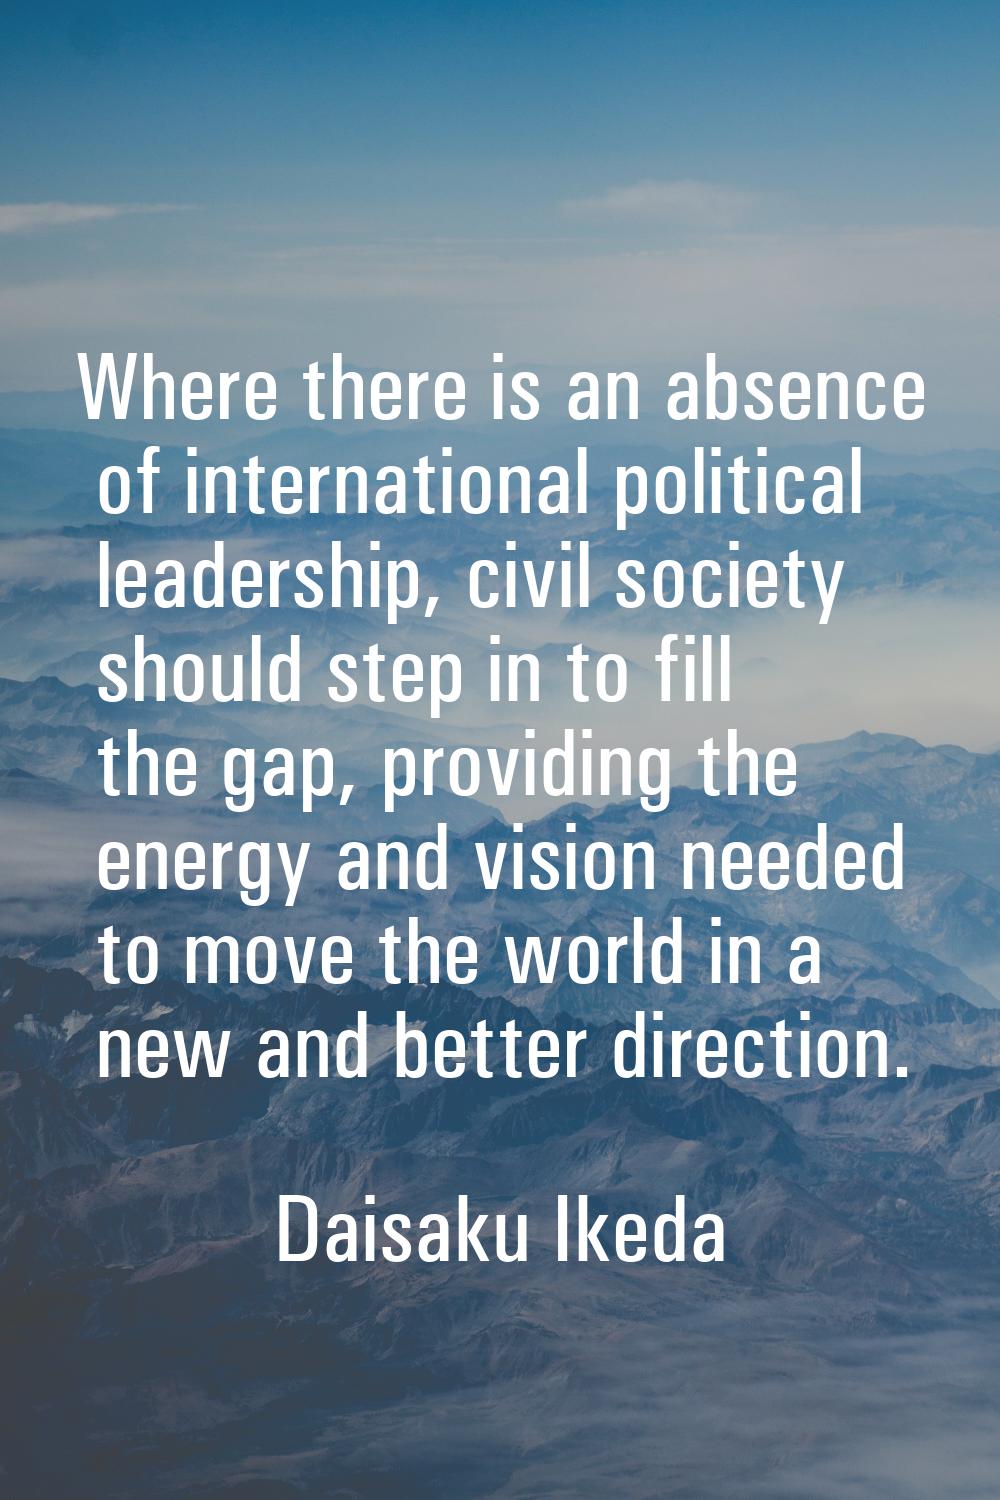 Where there is an absence of international political leadership, civil society should step in to fi